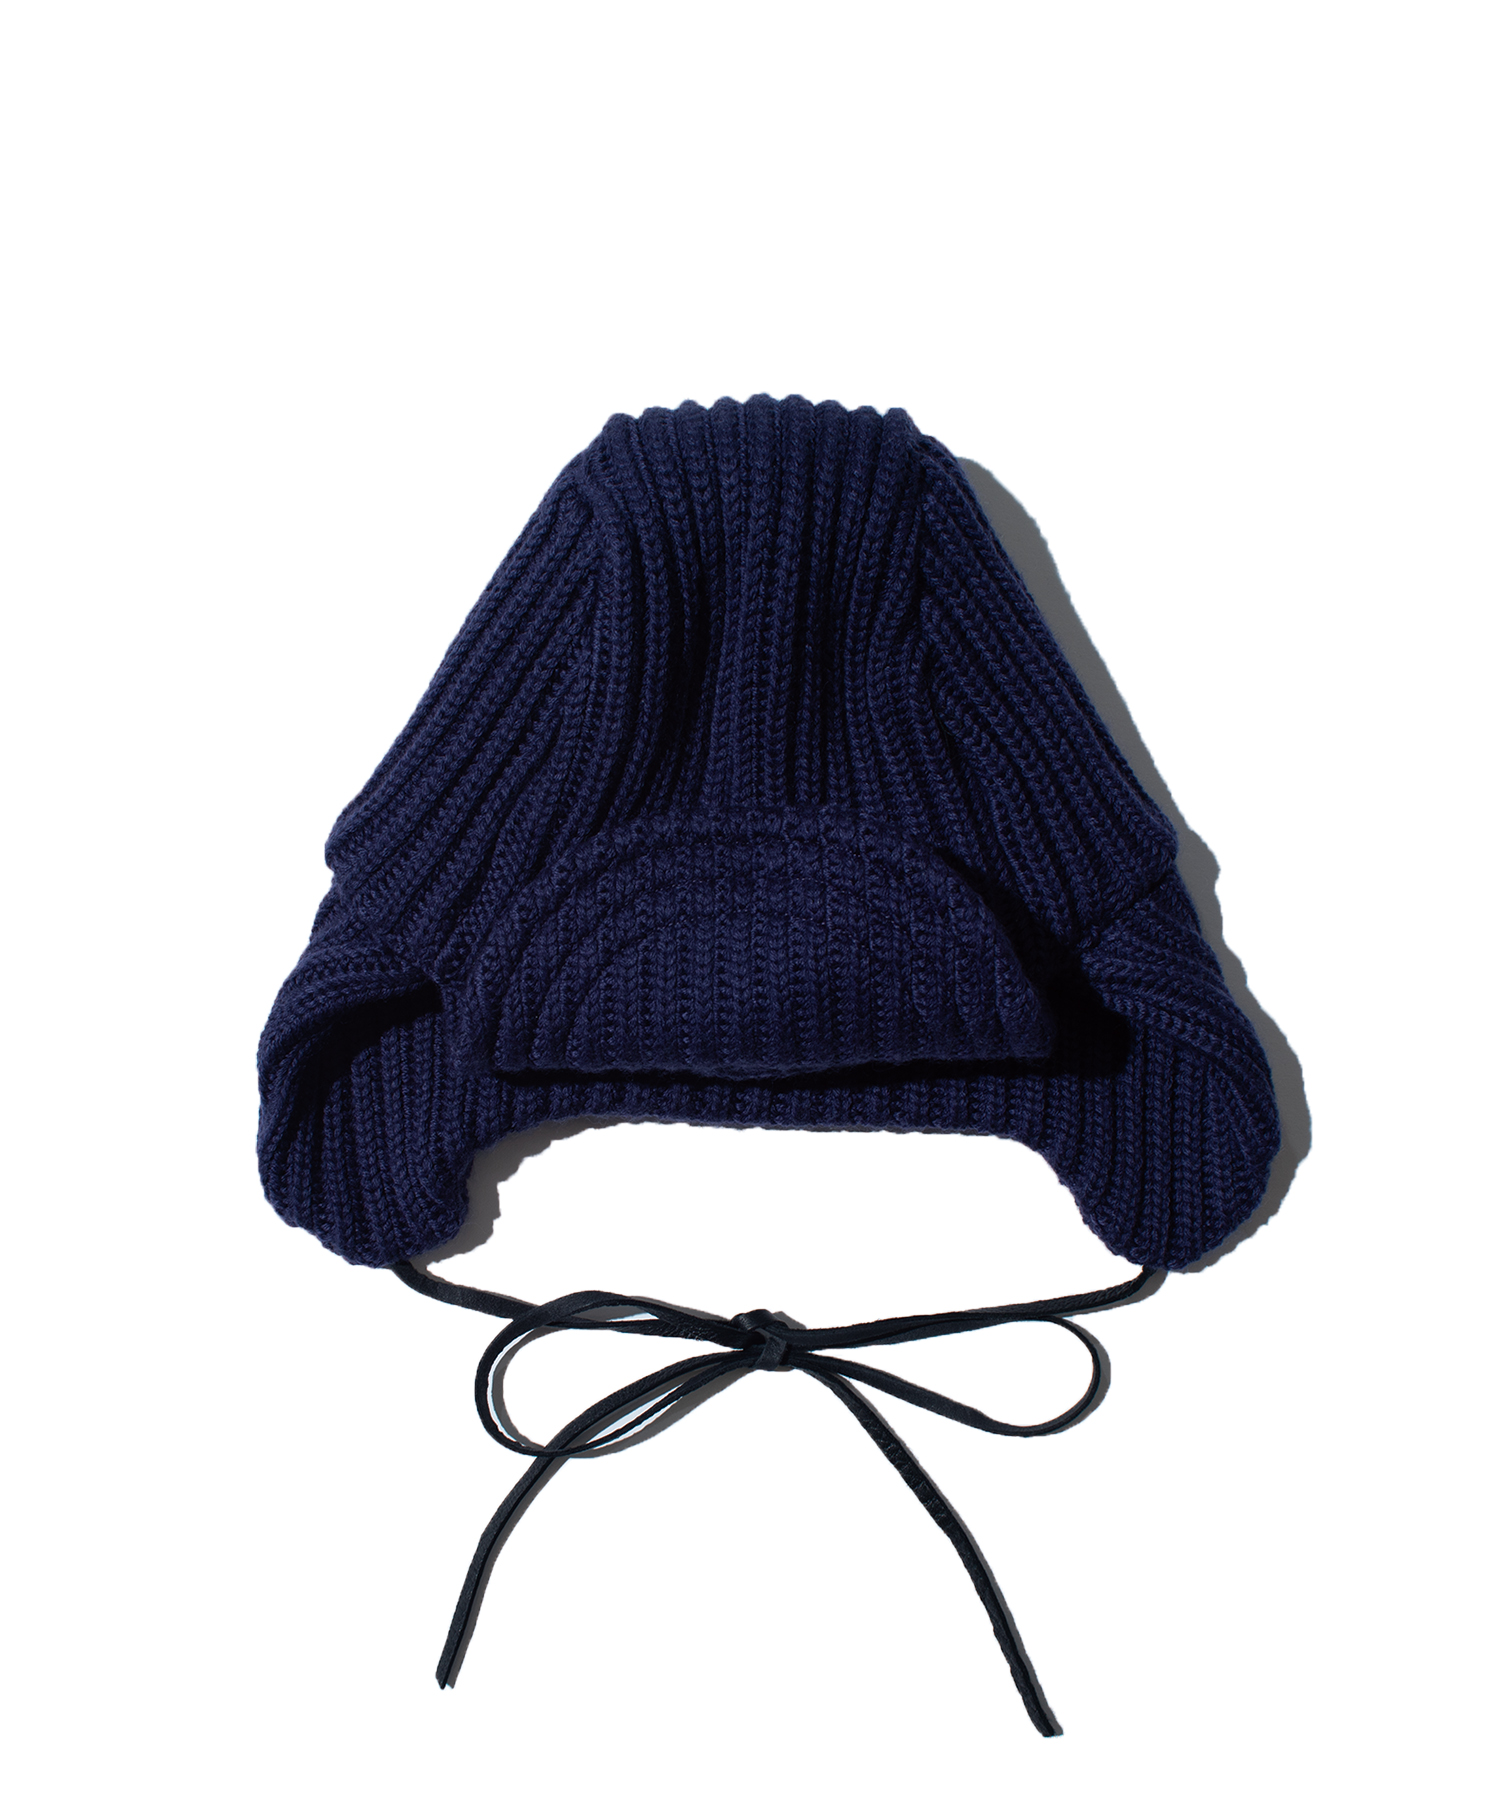 South2 West8 Bomber Cap-W/A knit / サウスツーウエストエイト